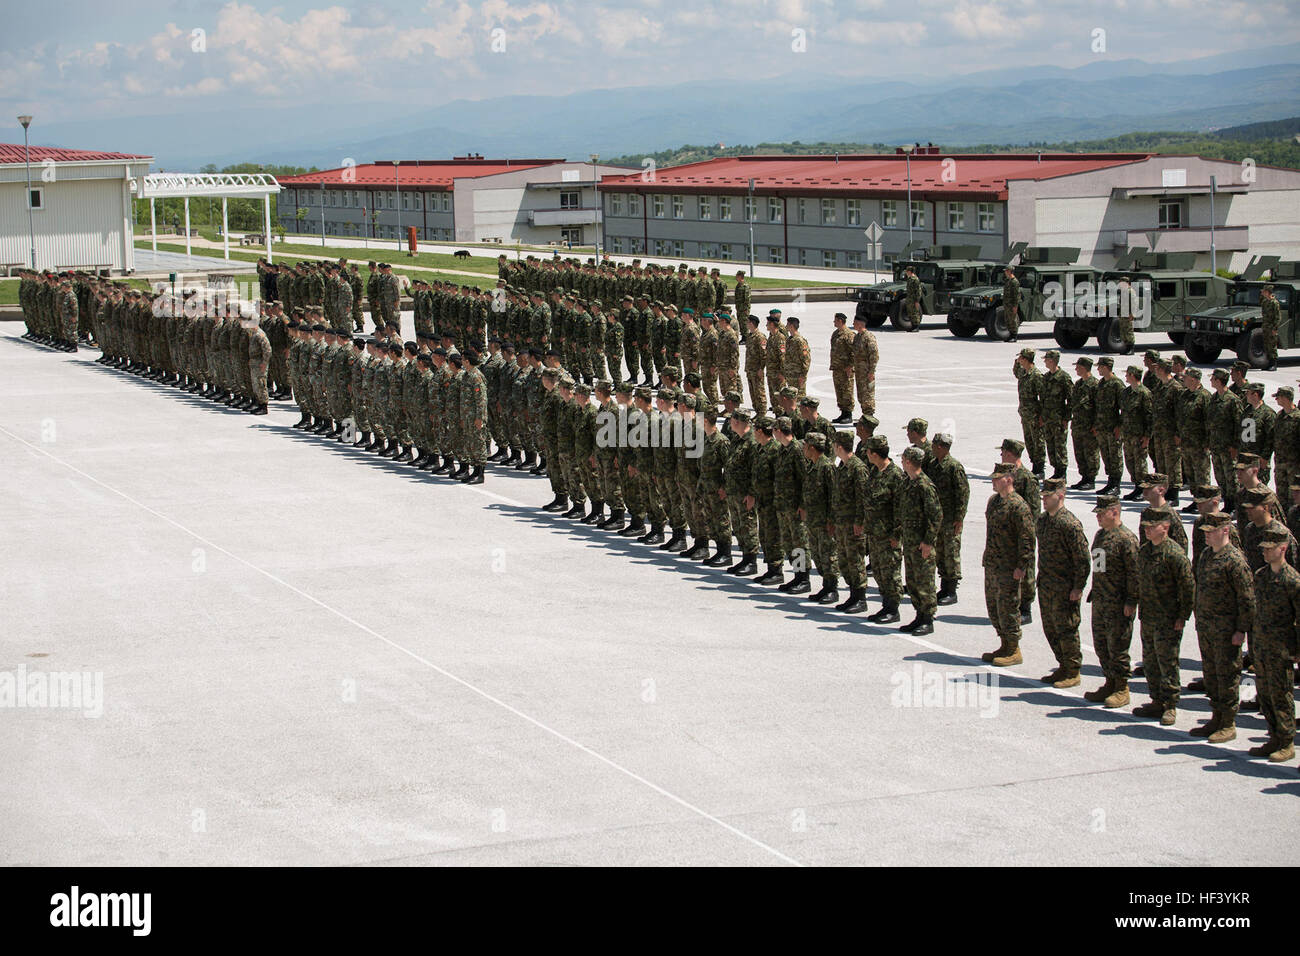 Service members from Bosnia, Bulgaria, Macedonia, Montenegro, Slovenia, Serbia and the United States stand in formation during the opening ceremony of Platinum Wolf 2016 at the Peacekeeping  Operations Training Center South Base in  Bujanovac, Serbia, May 9, 2016. Reserve Marines from 4th Law Enforcement Battalion, Force Headquarters Group, Marine Forces Reserve, and 3rd Civil Affairs Group, FHG, MARFORRES, are joining the partner nations to participate in the peacekeeping operations training exercise focused on non-lethal systems. (U.S. Marine Corps photo by Sgt. Sara Graham) Platinum Wolf 20 Stock Photo